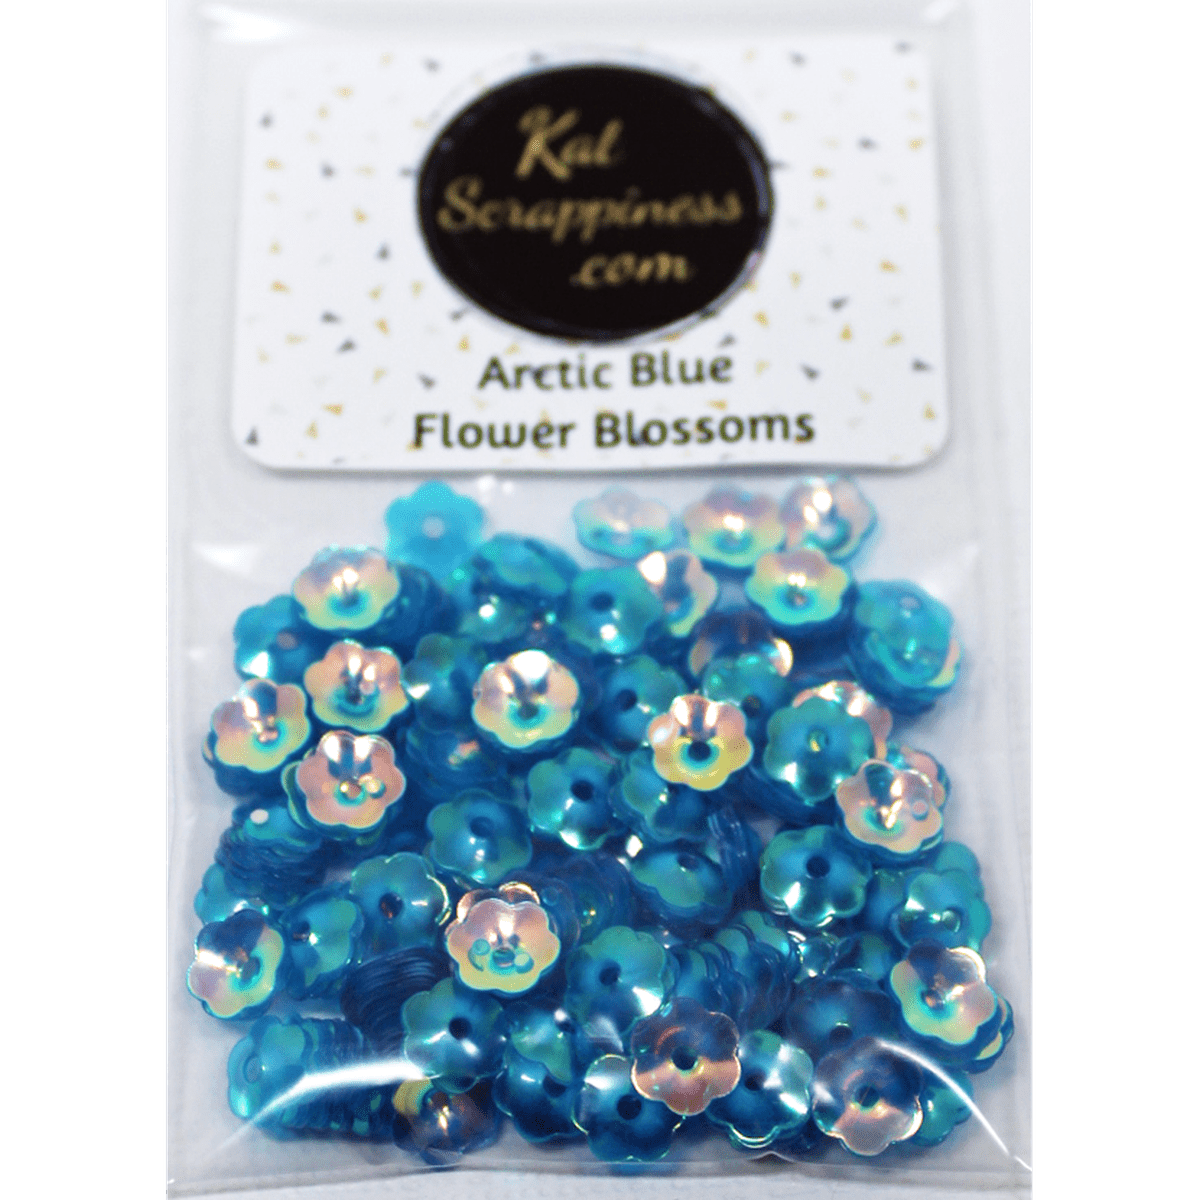 6mm Arctic Blue Flower Blossom Sequins Shaker Card Fillers - Kat Scrappiness